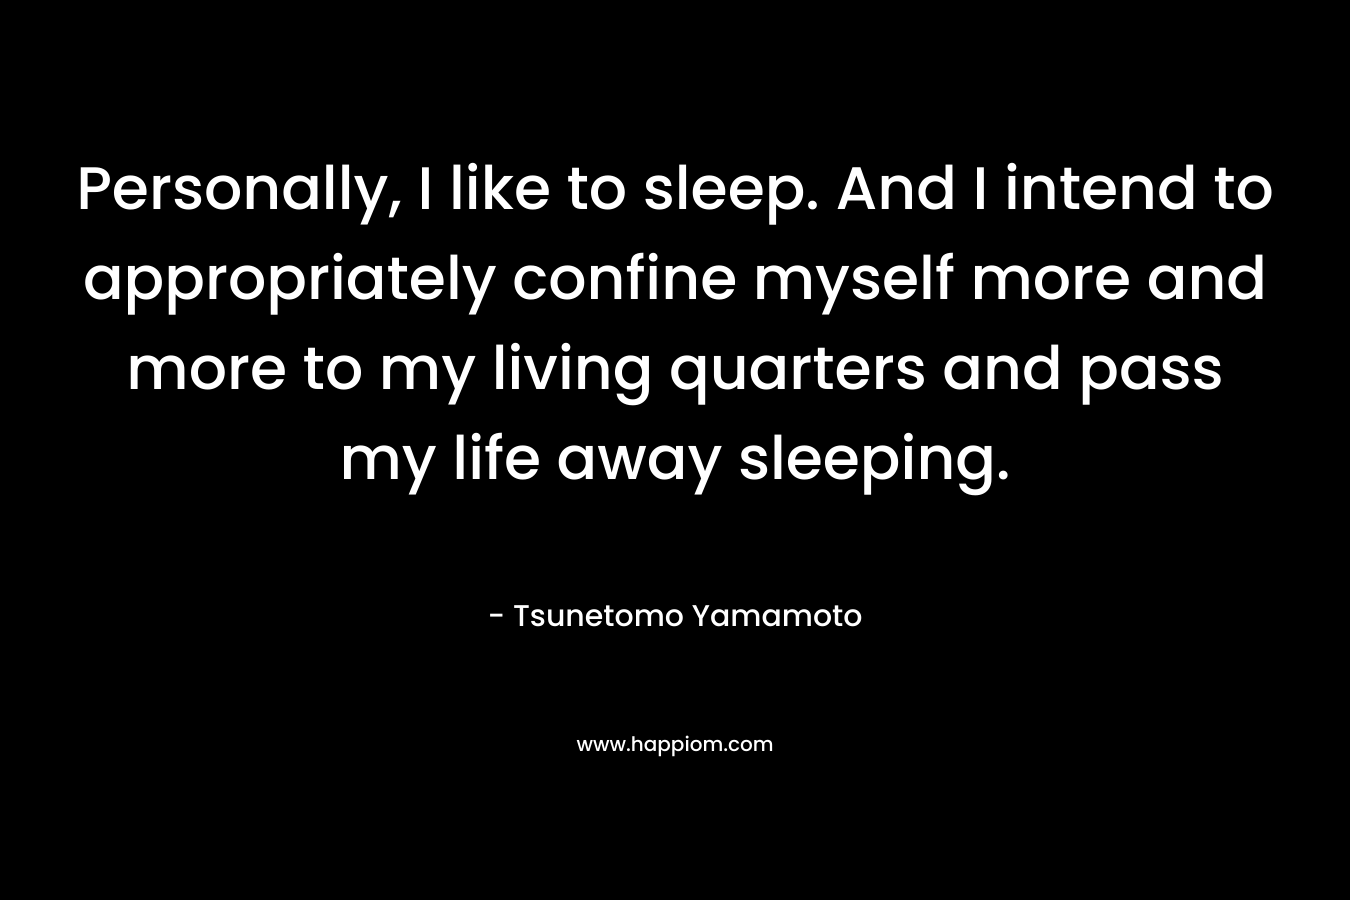 Personally, I like to sleep. And I intend to appropriately confine myself more and more to my living quarters and pass my life away sleeping. – Tsunetomo Yamamoto